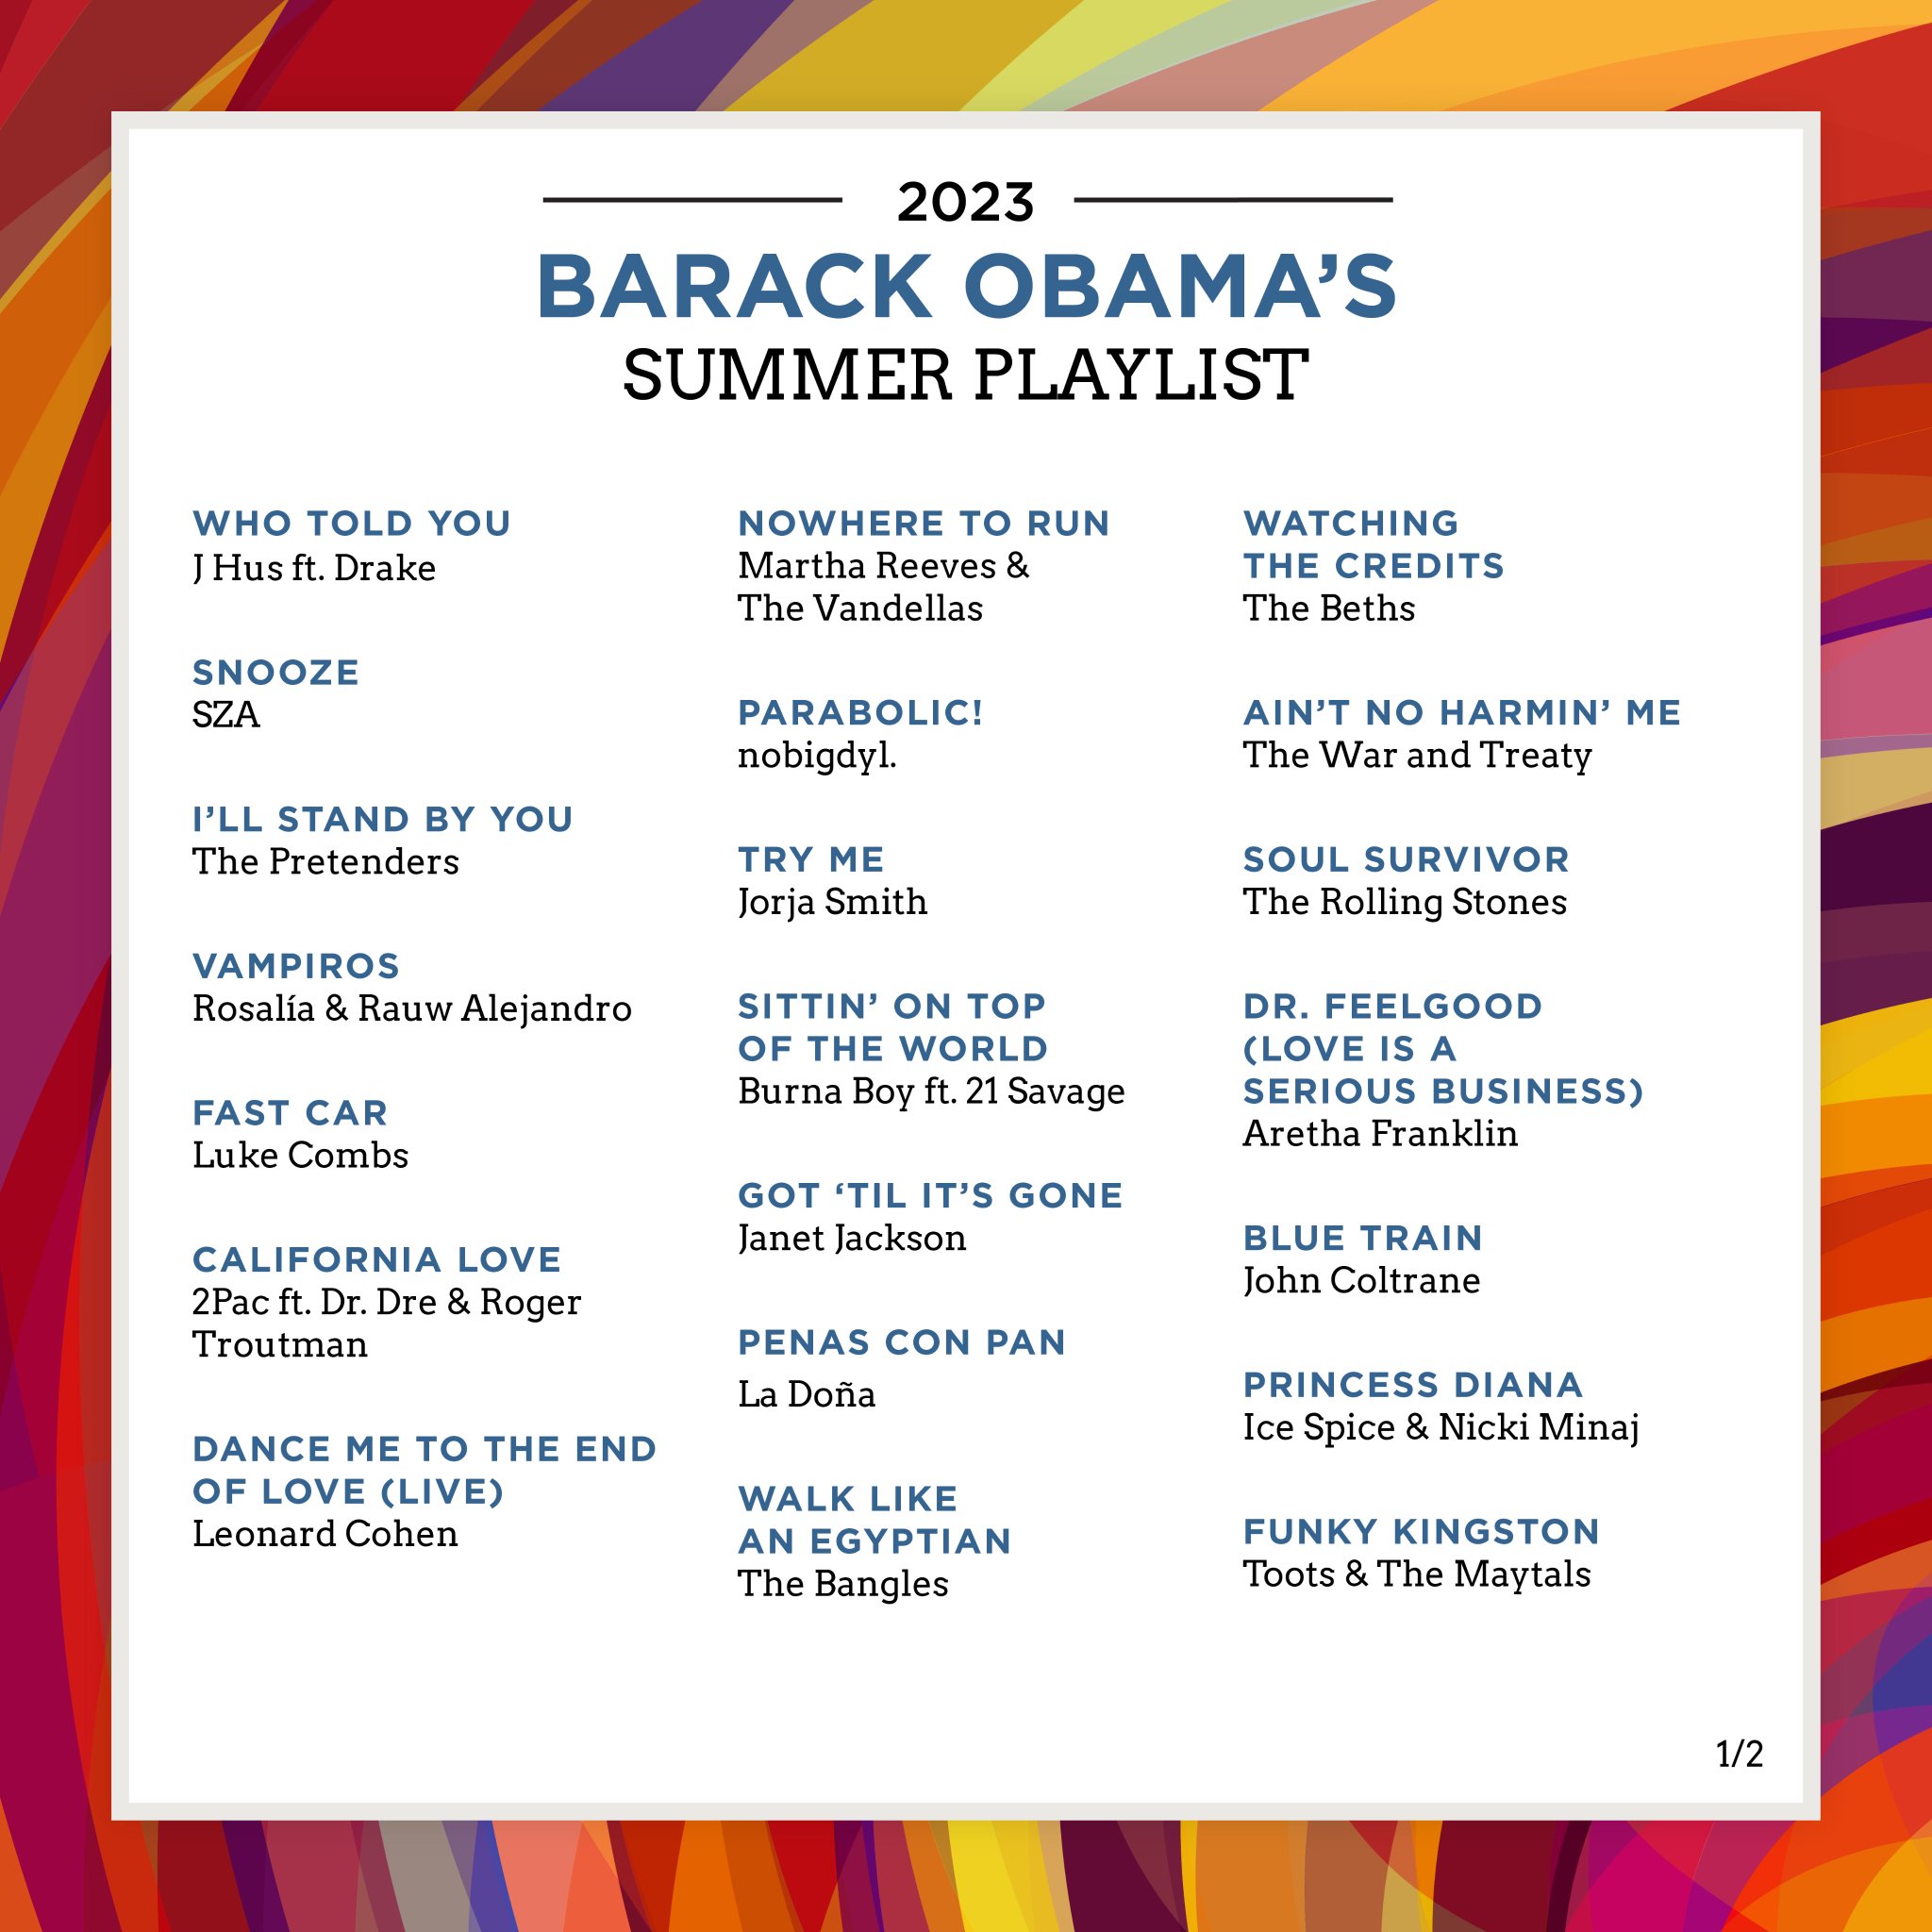 Barack Obama on X: Like I do every year, here are some songs I've